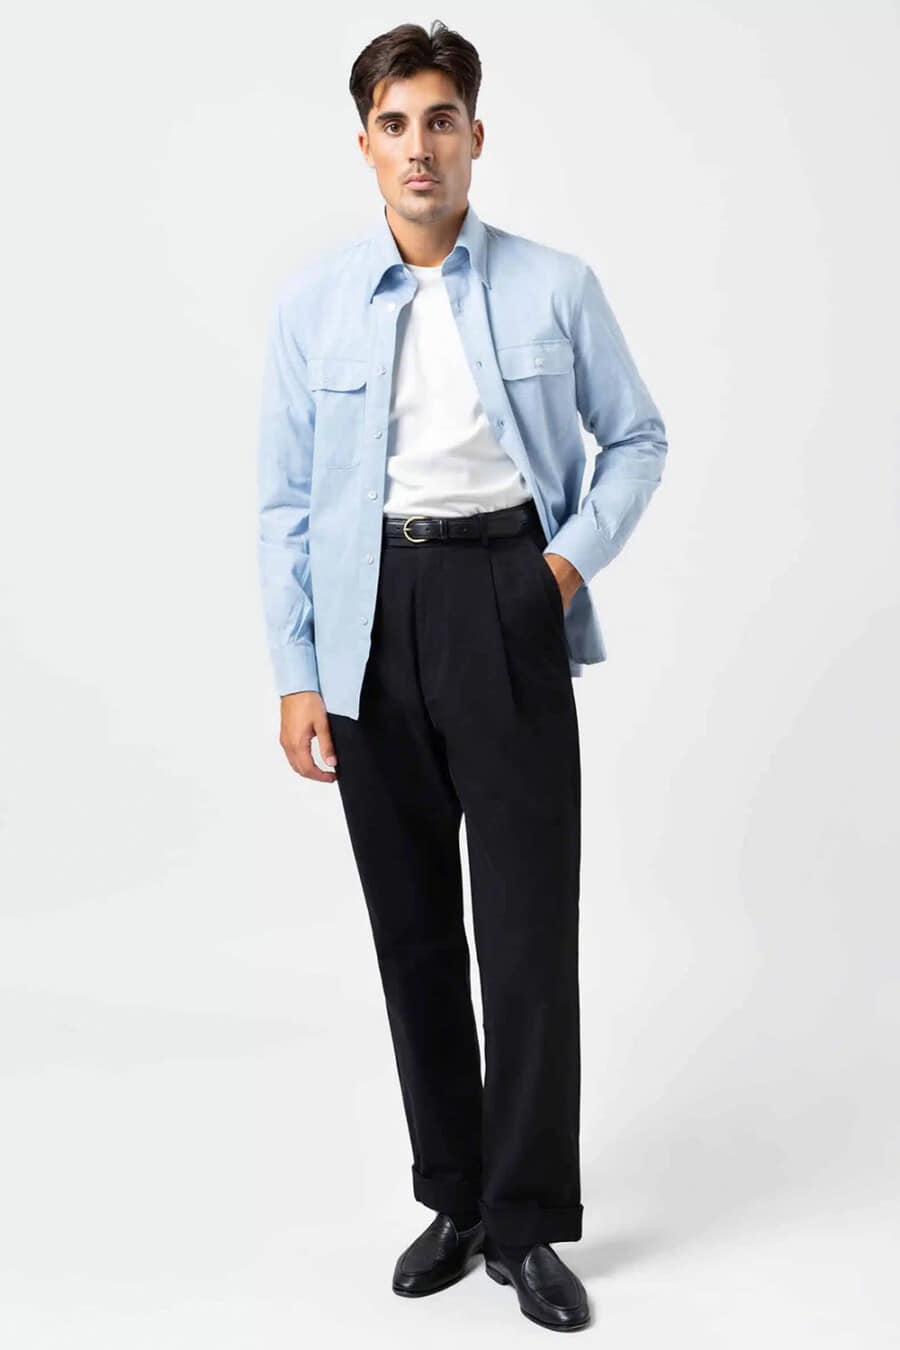 Men's pale blue overshirt, tucked in white T-shirt, navy pleated pants and black leather Belgian loafers outfit